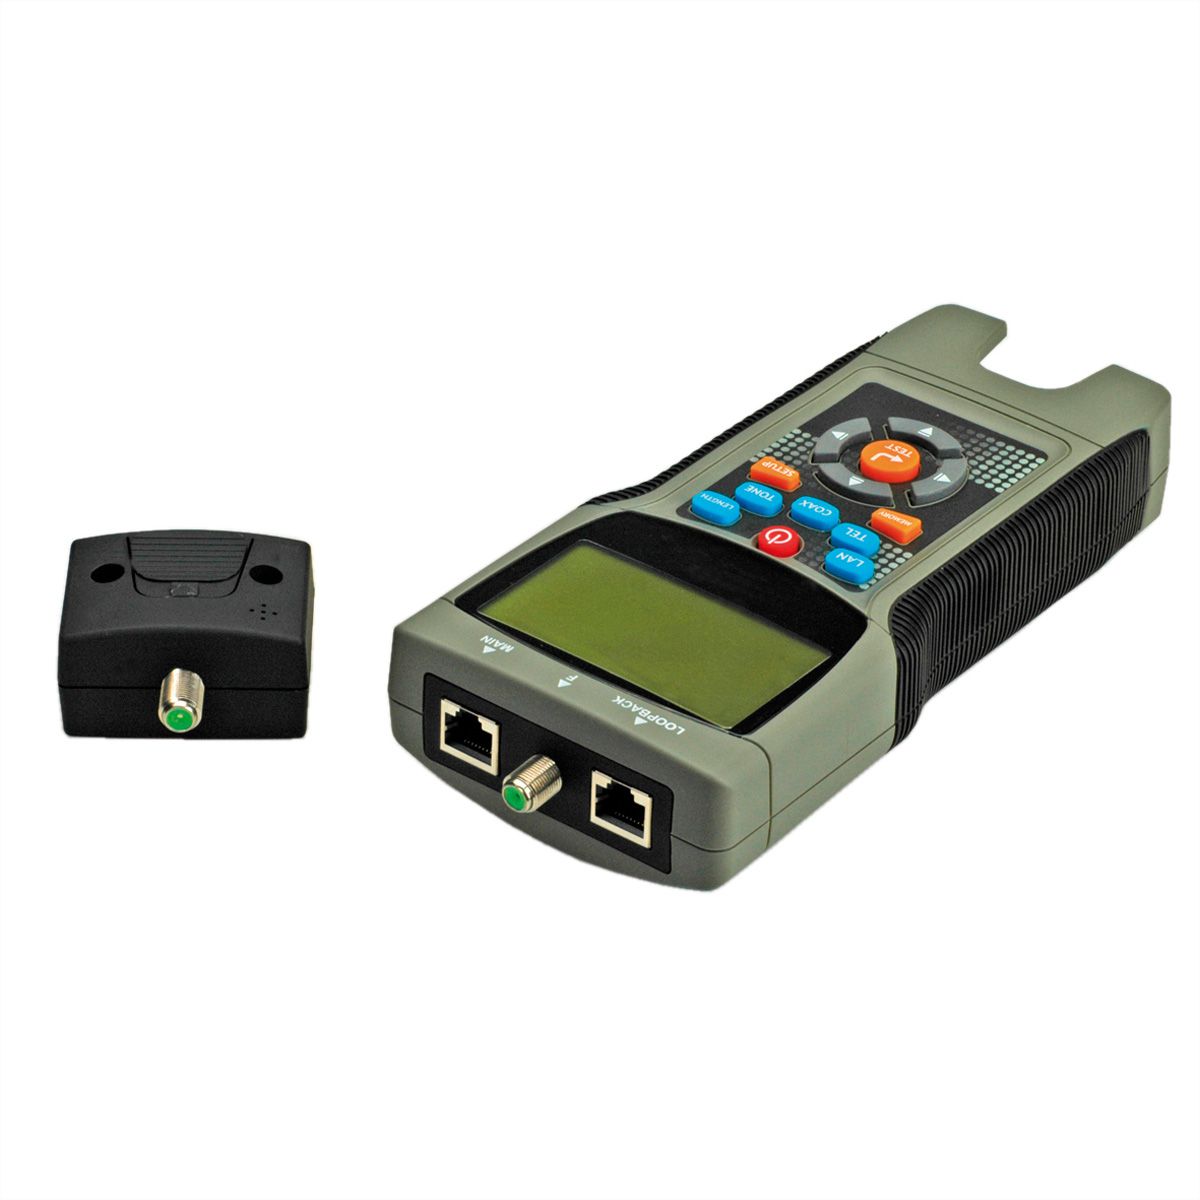 VALUE LAN Cable Multifunction Tester - SECOMP International AG